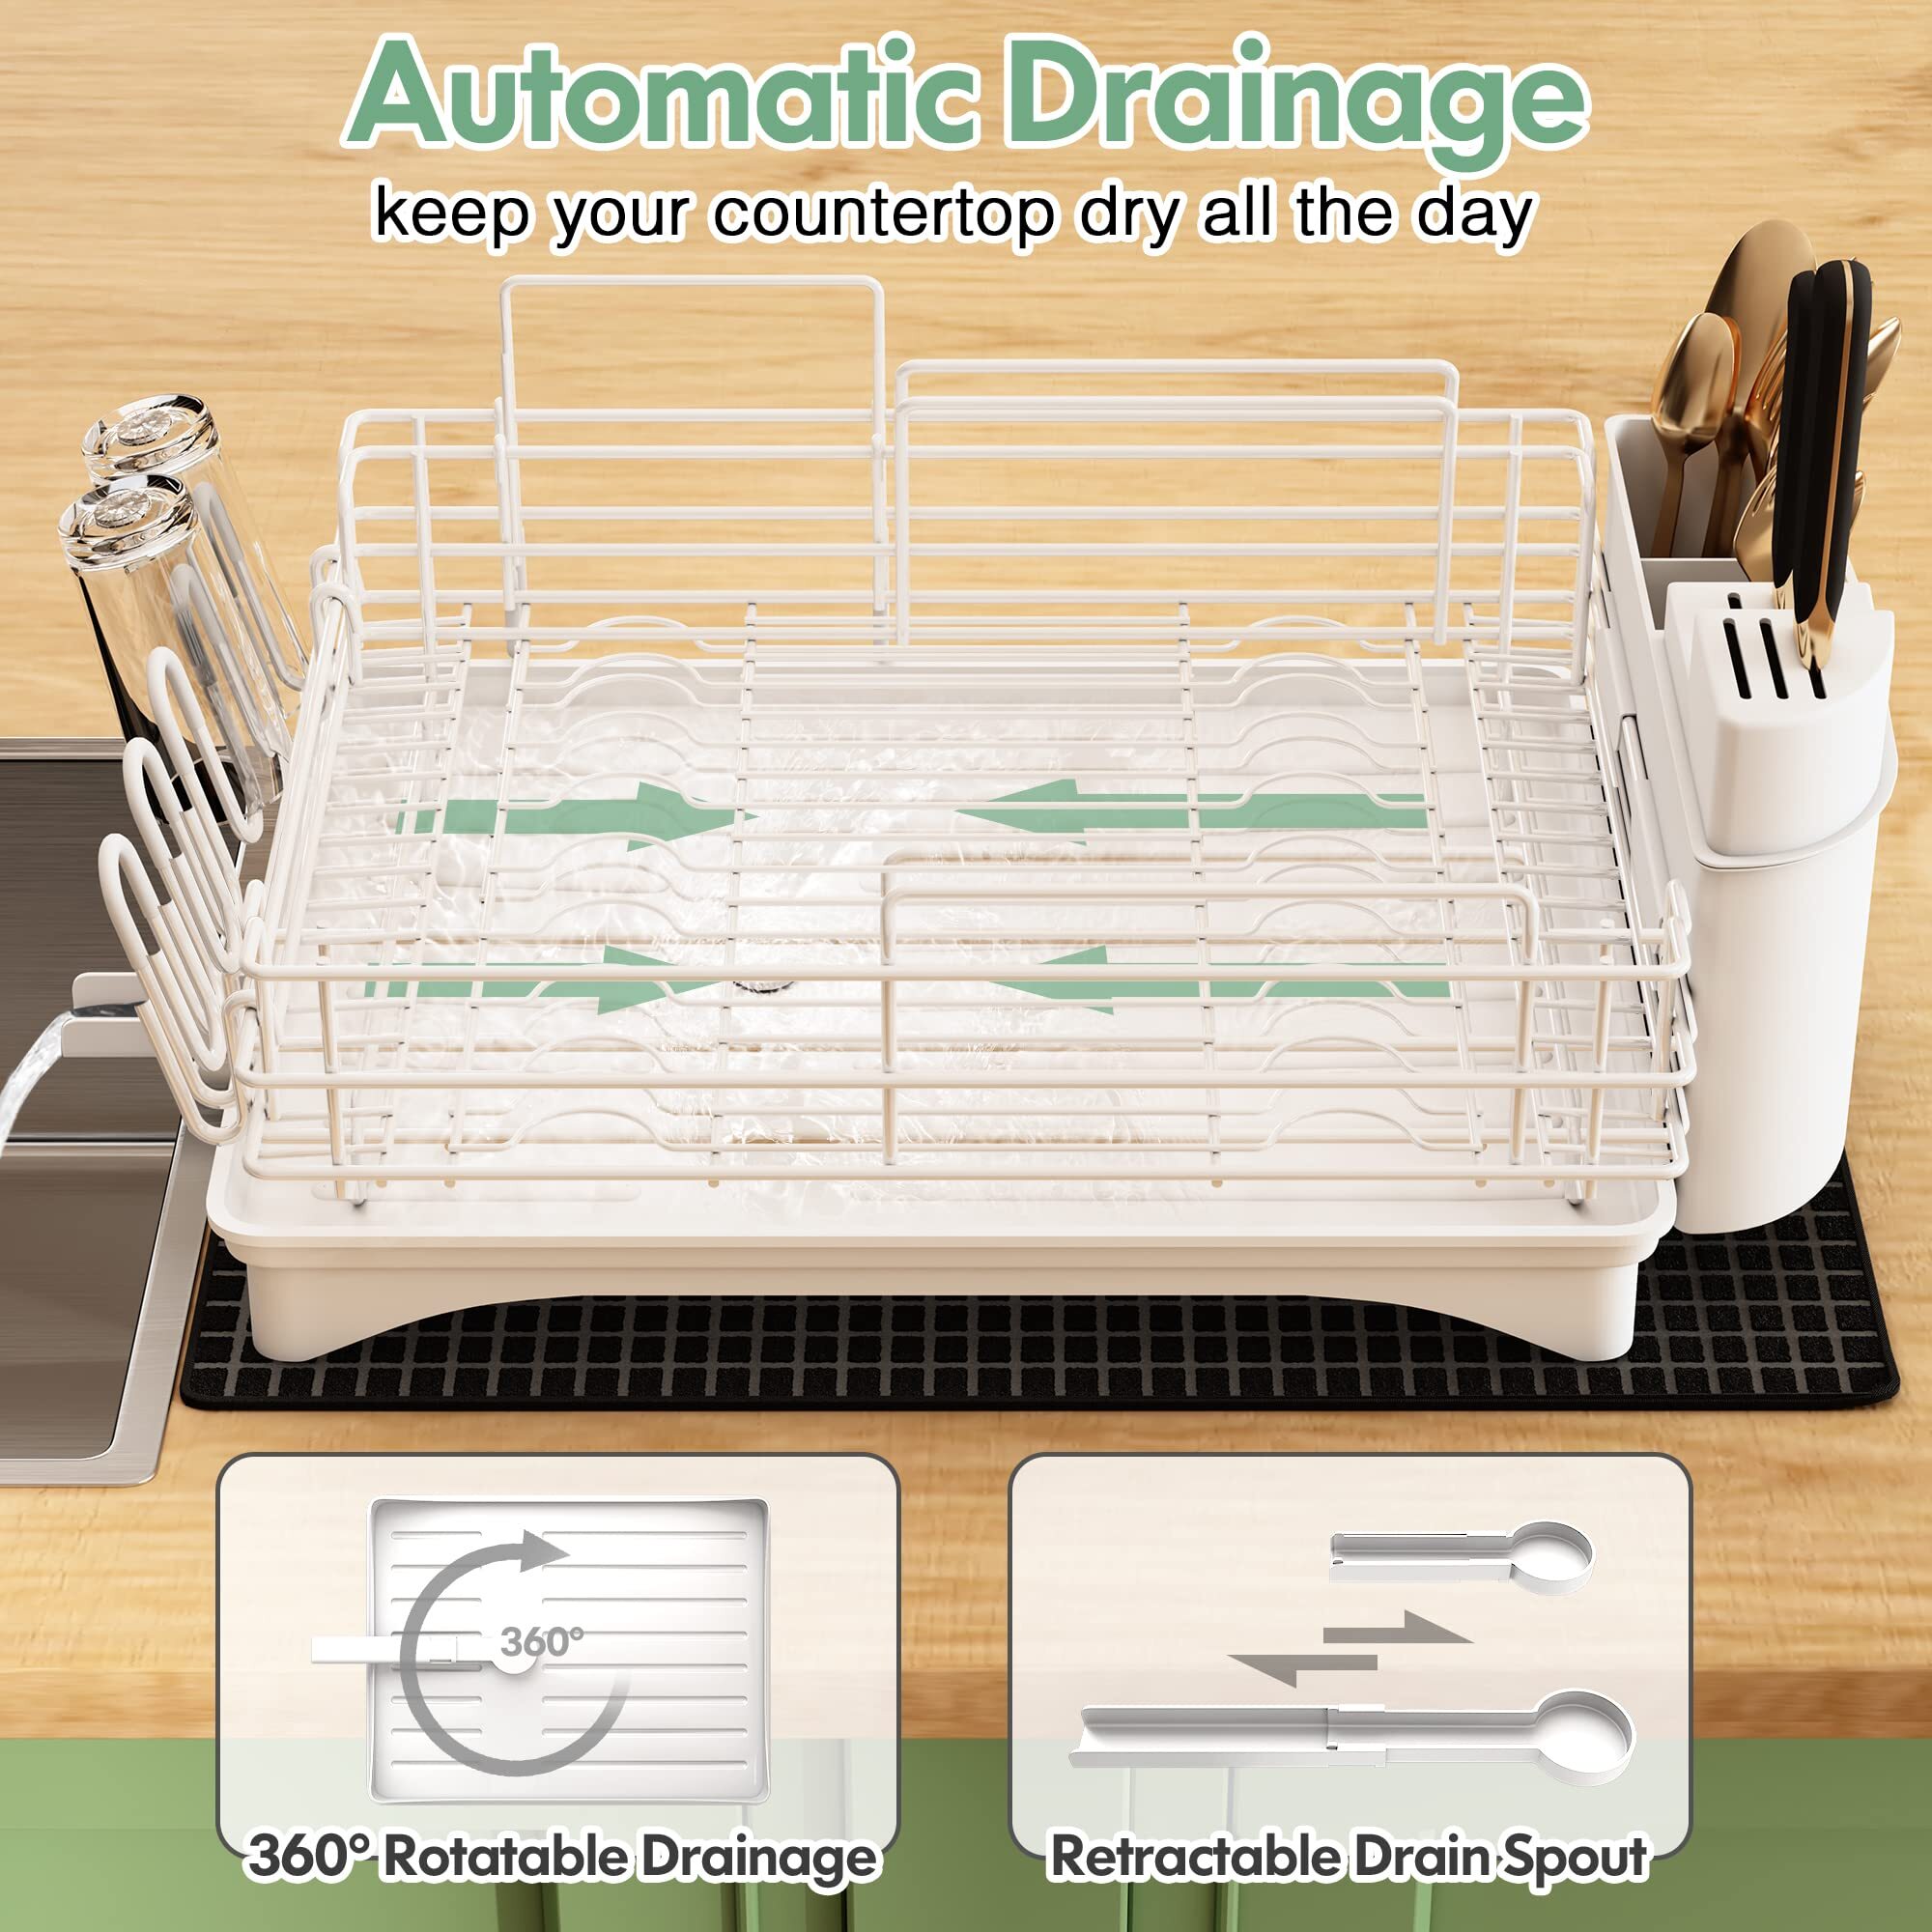 Dish Drying Racks for Kitchen Counter, Stainless Steel 2 Tier Black Dish Dryer Rack with Drainboard Set, Large Dish Drainers with Wine Glass Holder, Utensil Holder and Dryer Mat